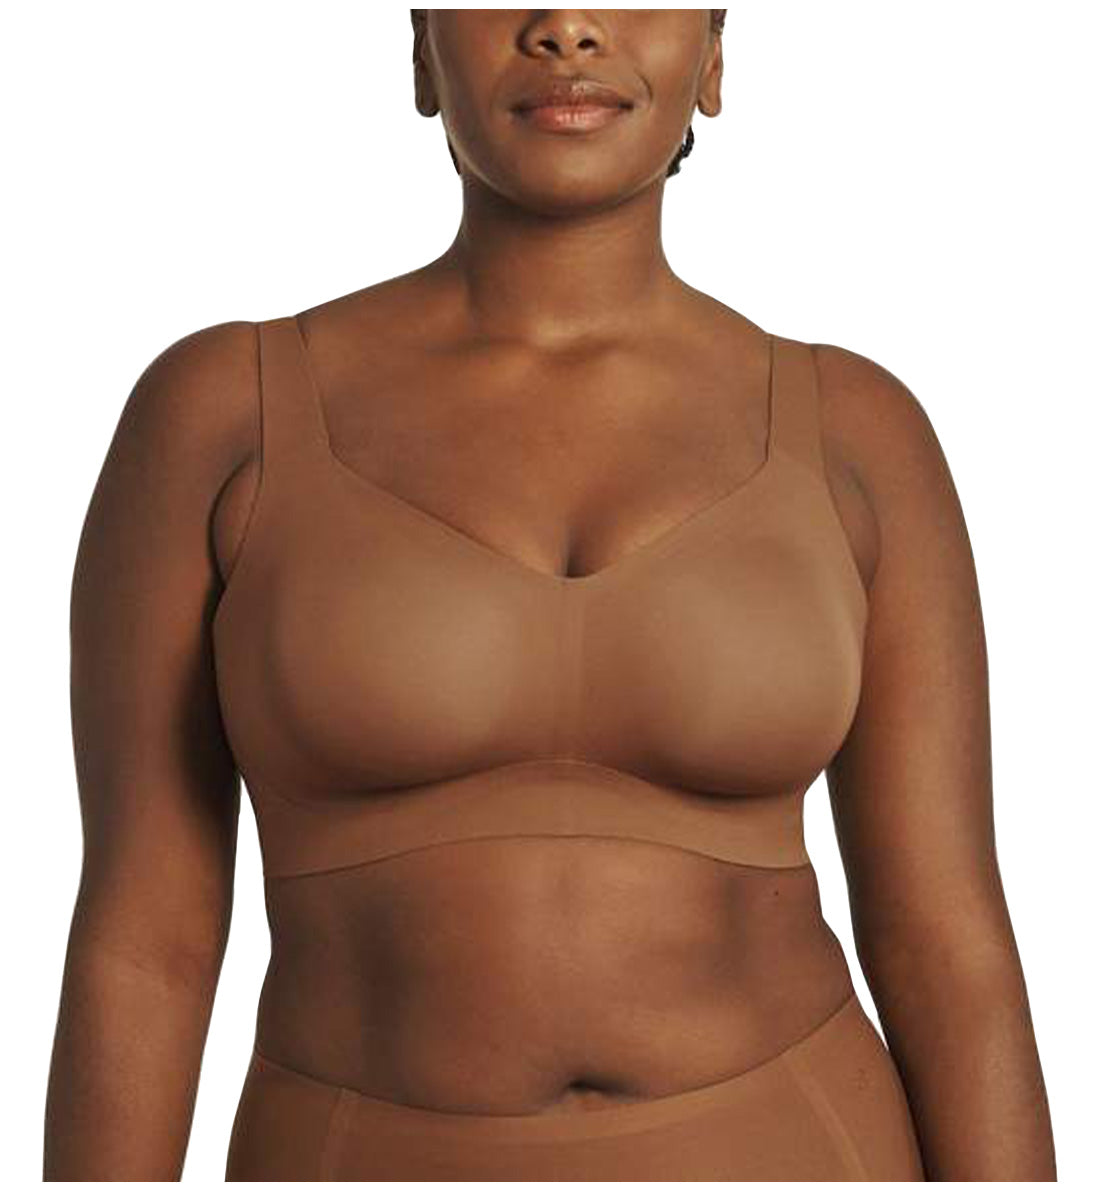 Evelyn & Bobbie BEYOND Adjustable Bra (1732),Small,Clay - Clay,Small